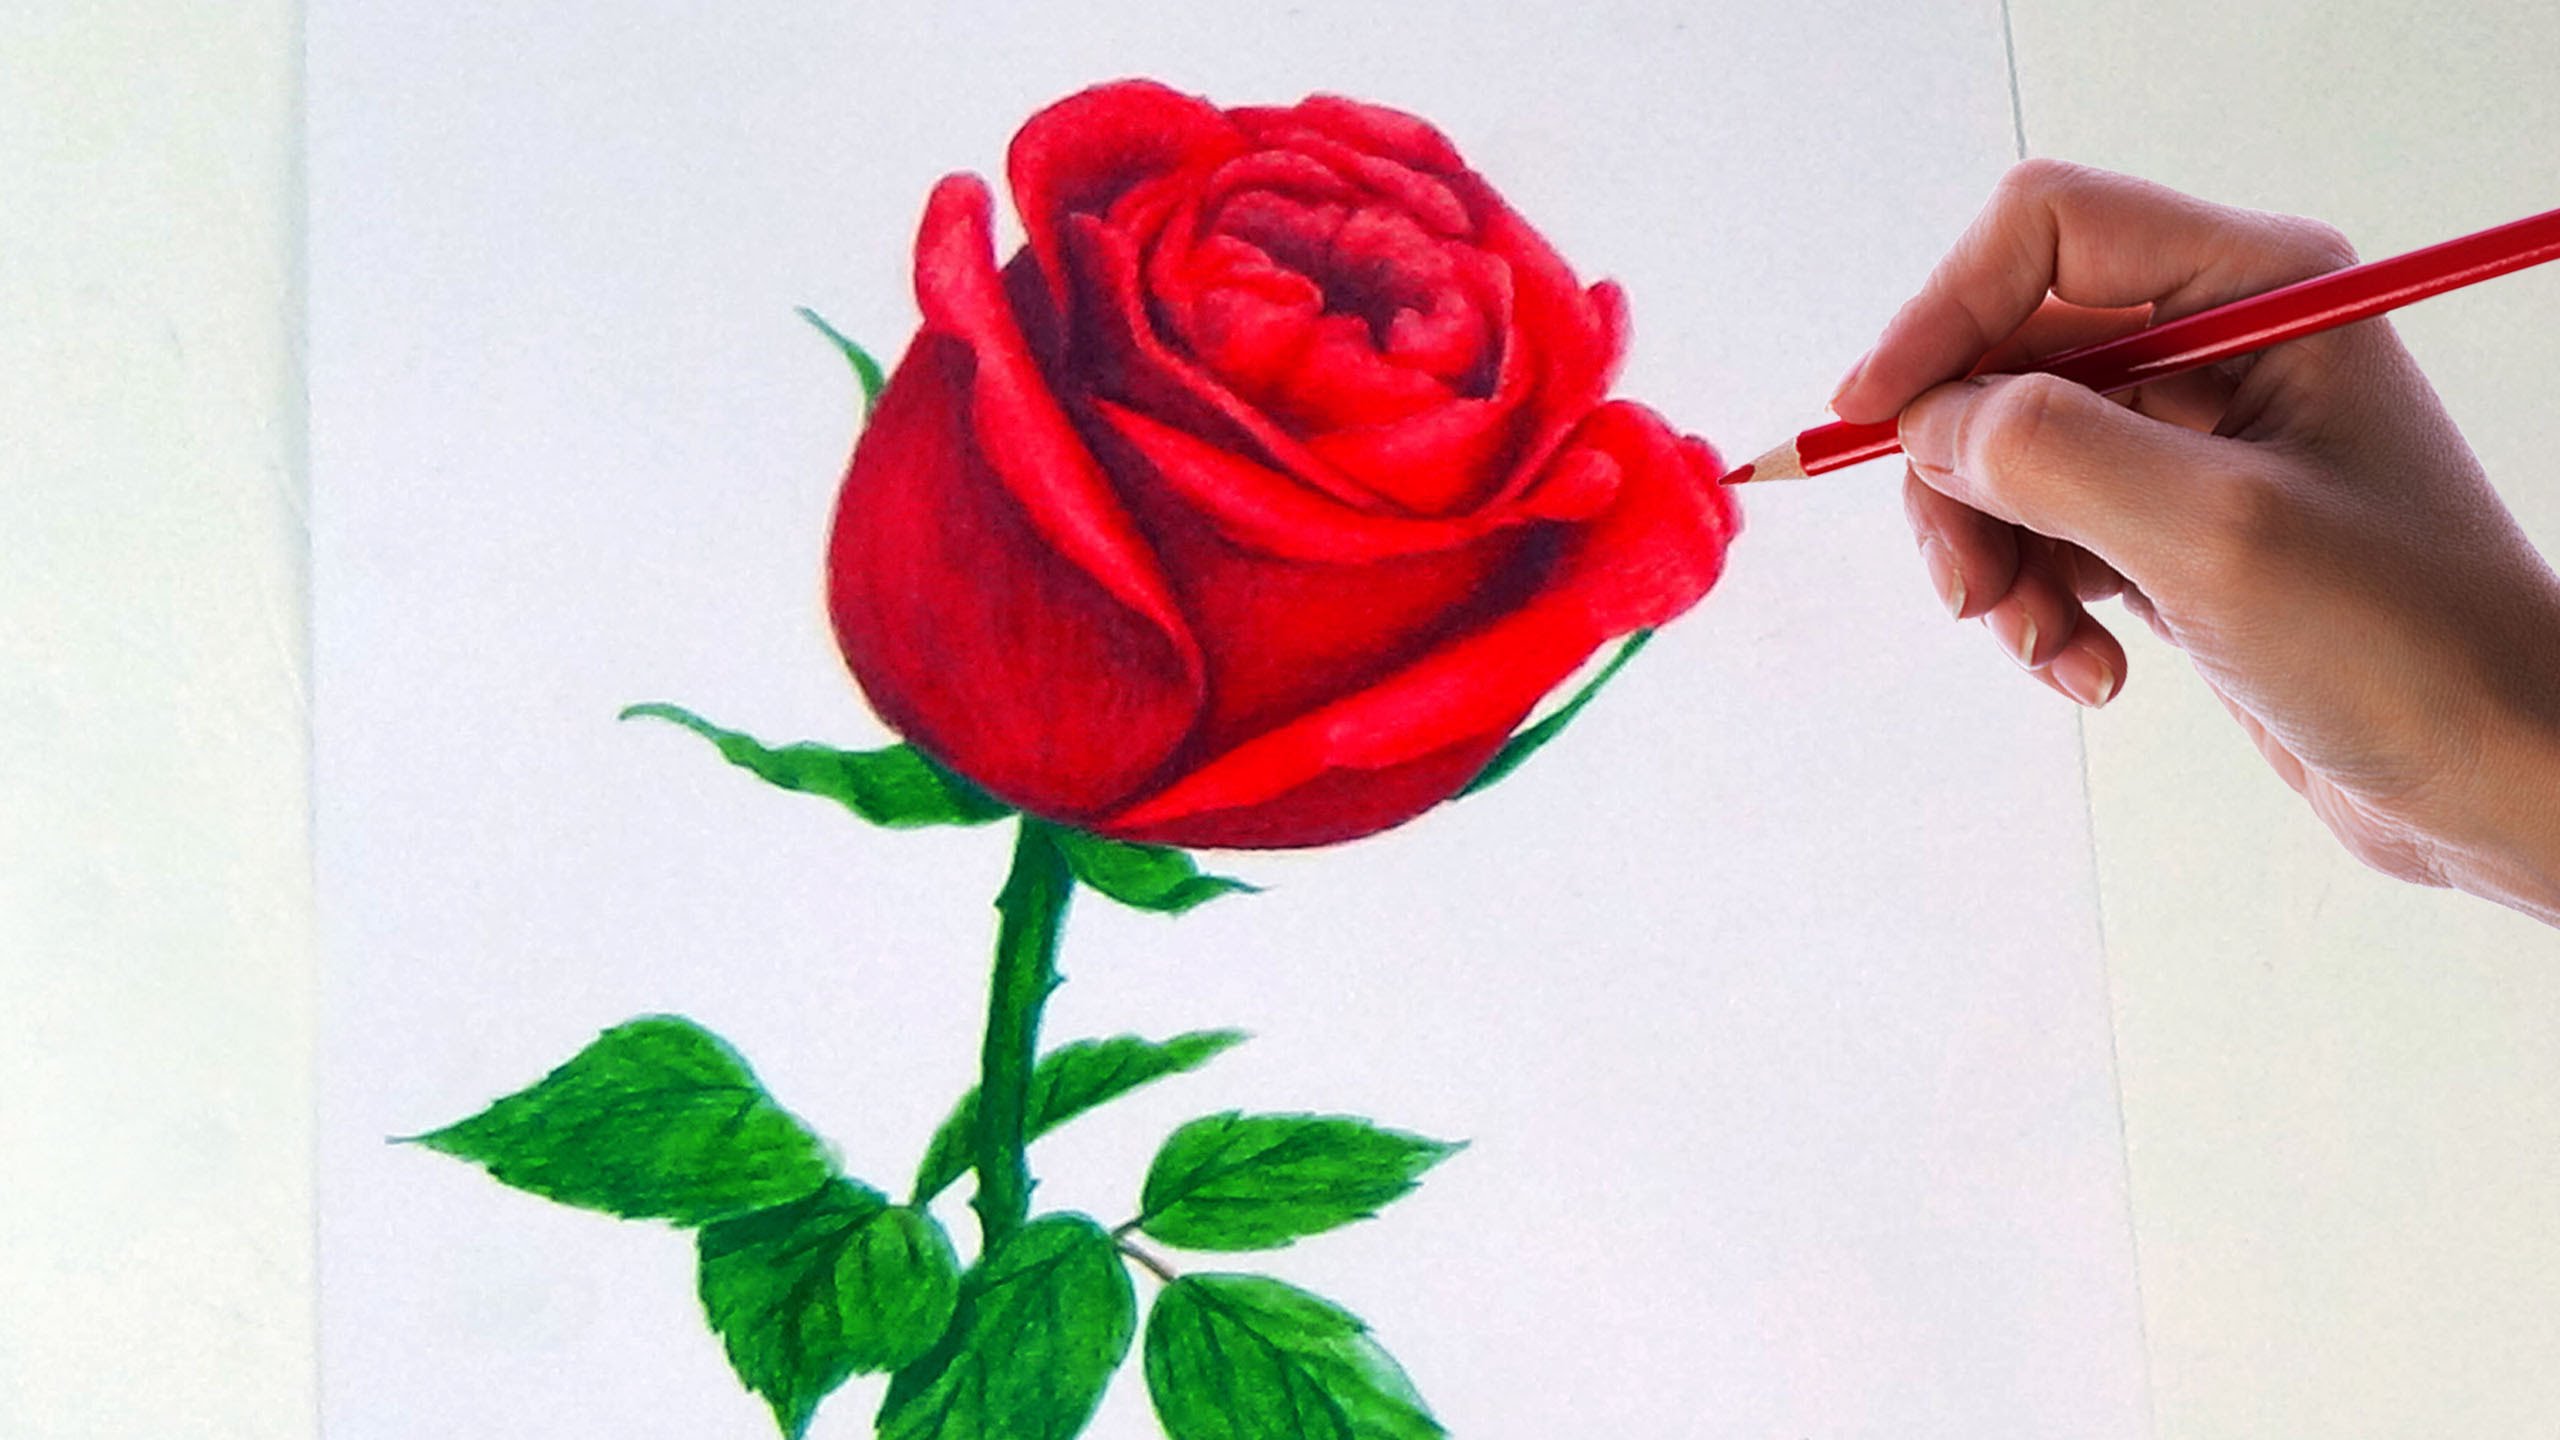 Drawing A Rose Flower With Simple Colored Pencils | - YouTube